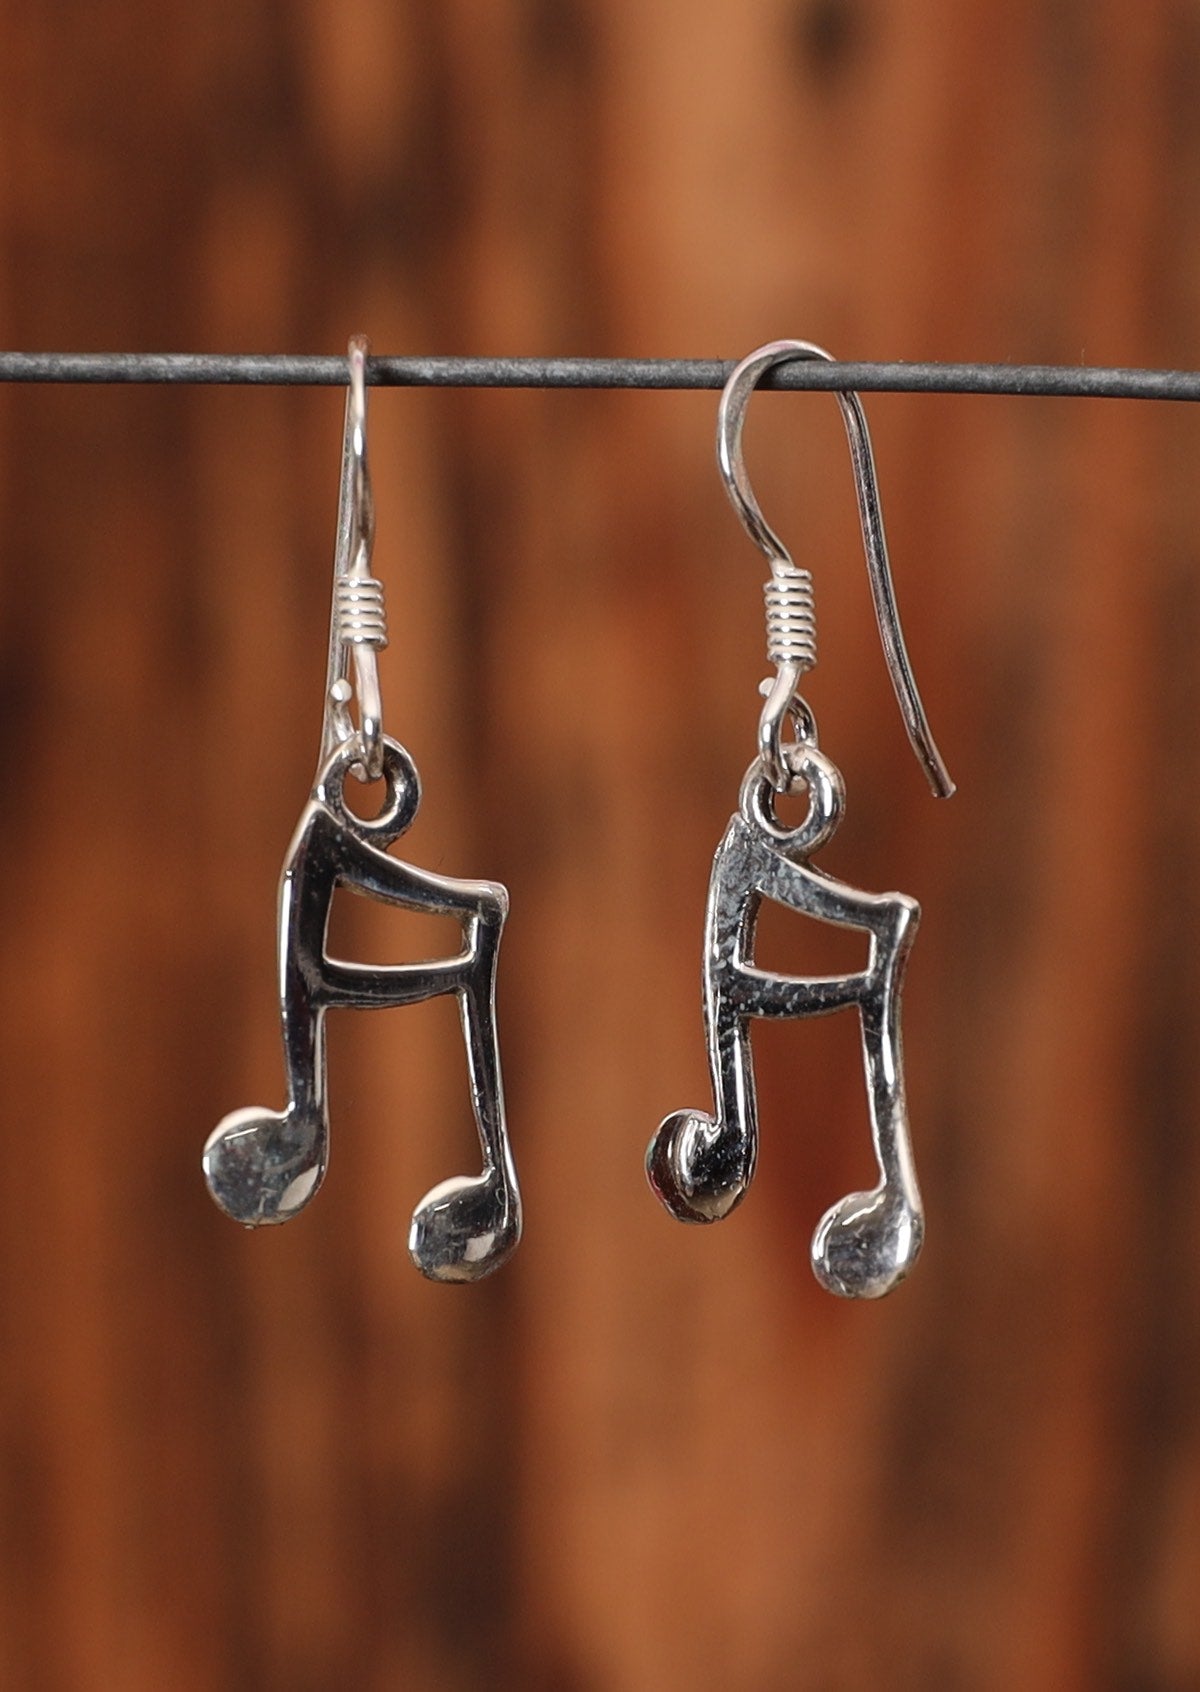 92.5% silver musical note earrings on a wire for display.